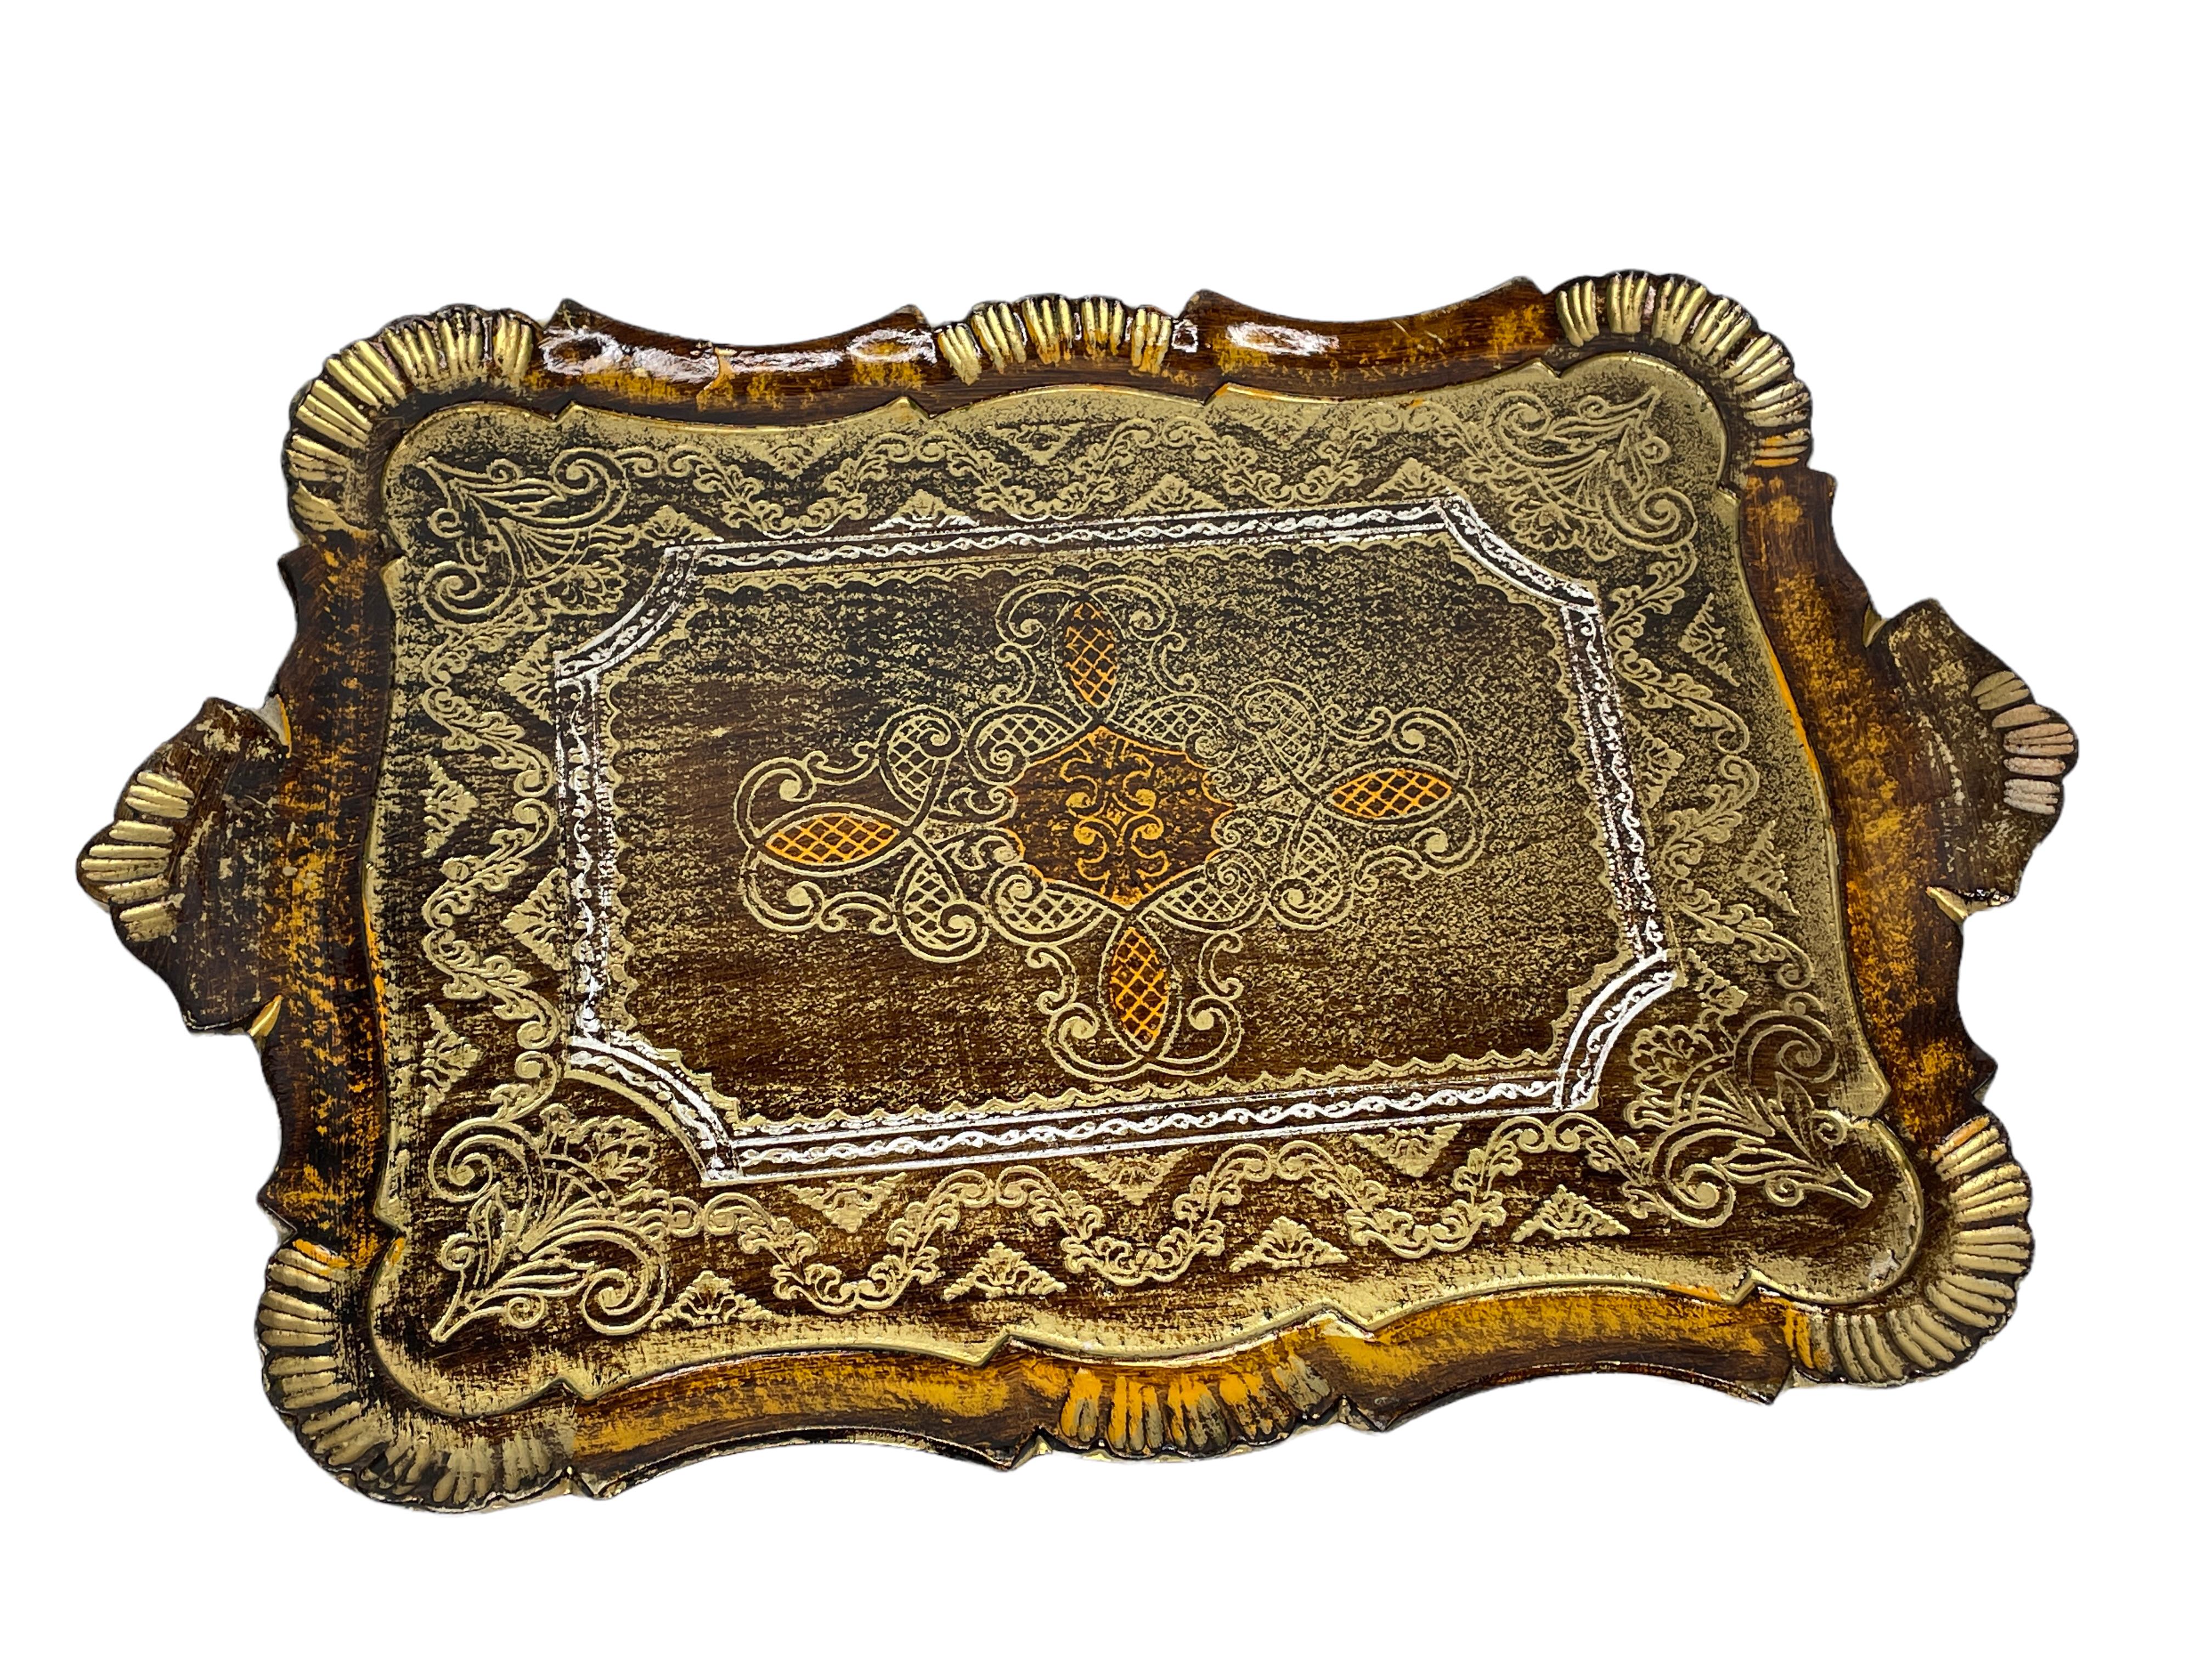 Offered is an absolutely stunning, 1960s Italian giltwood serving tray. Minor patina and paint lost gives this piece a classy statement. A nice addition to any table or room.